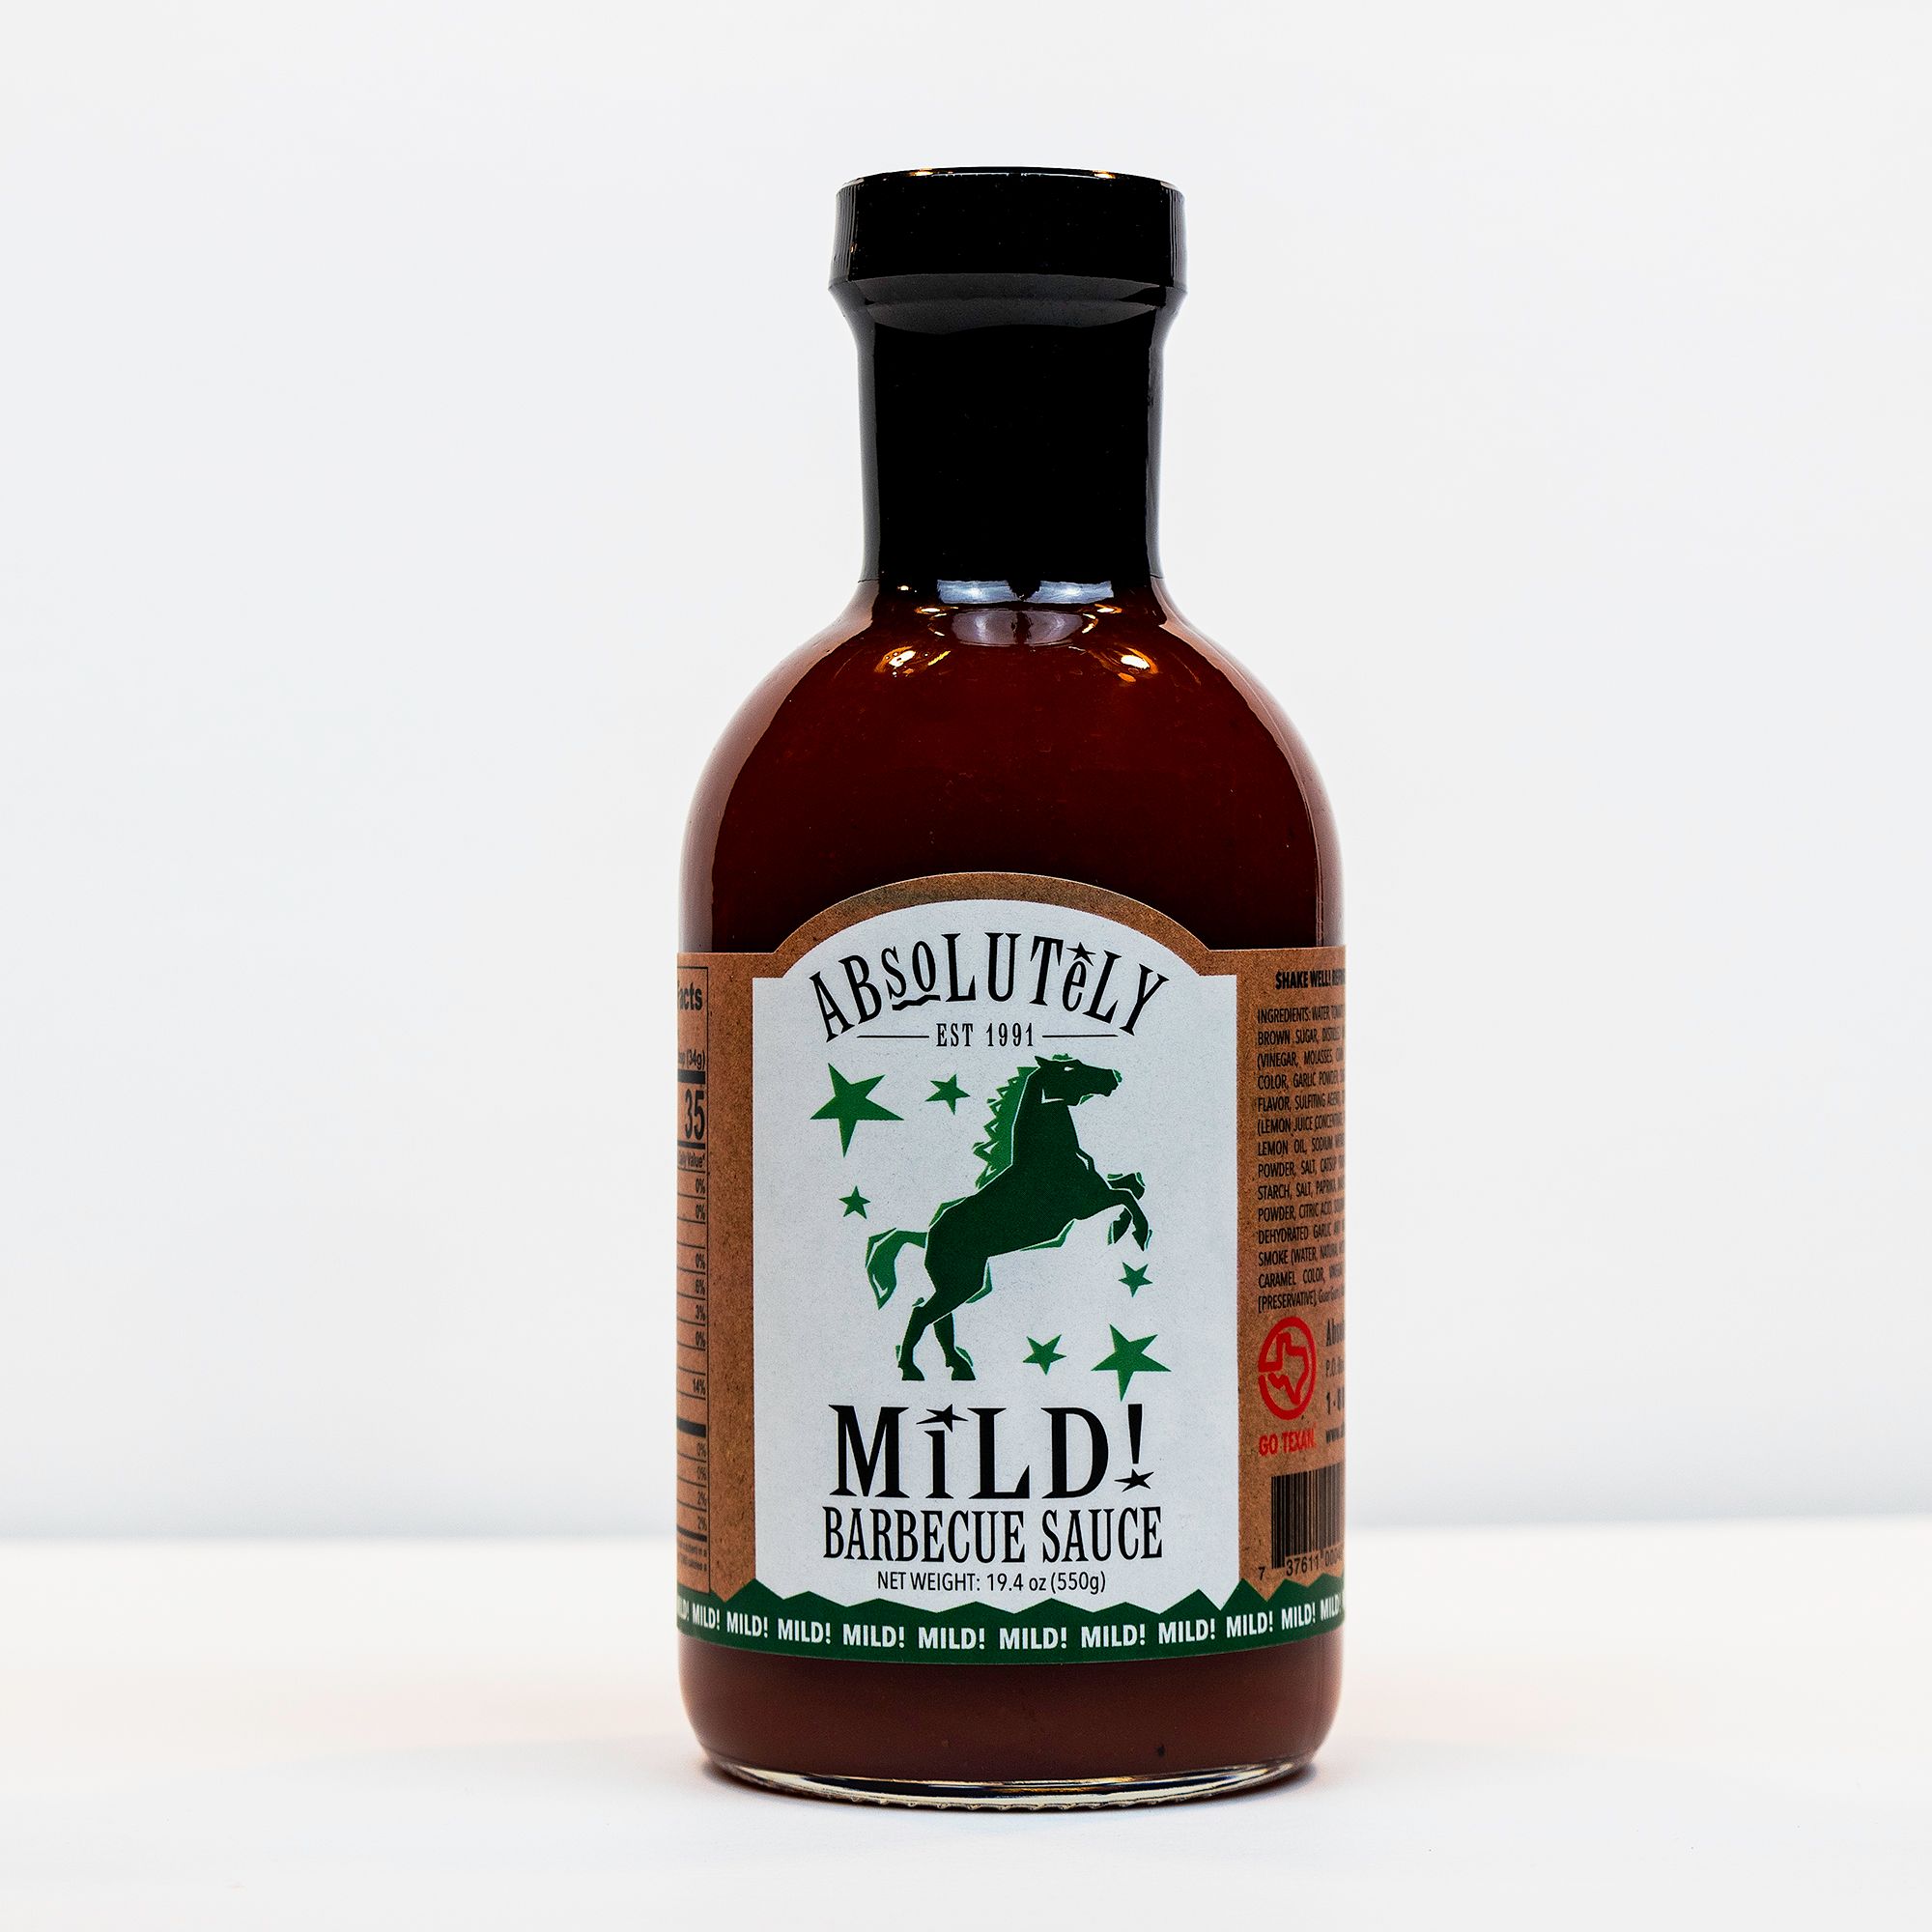 Absolutely Mild Barbecue Sauce